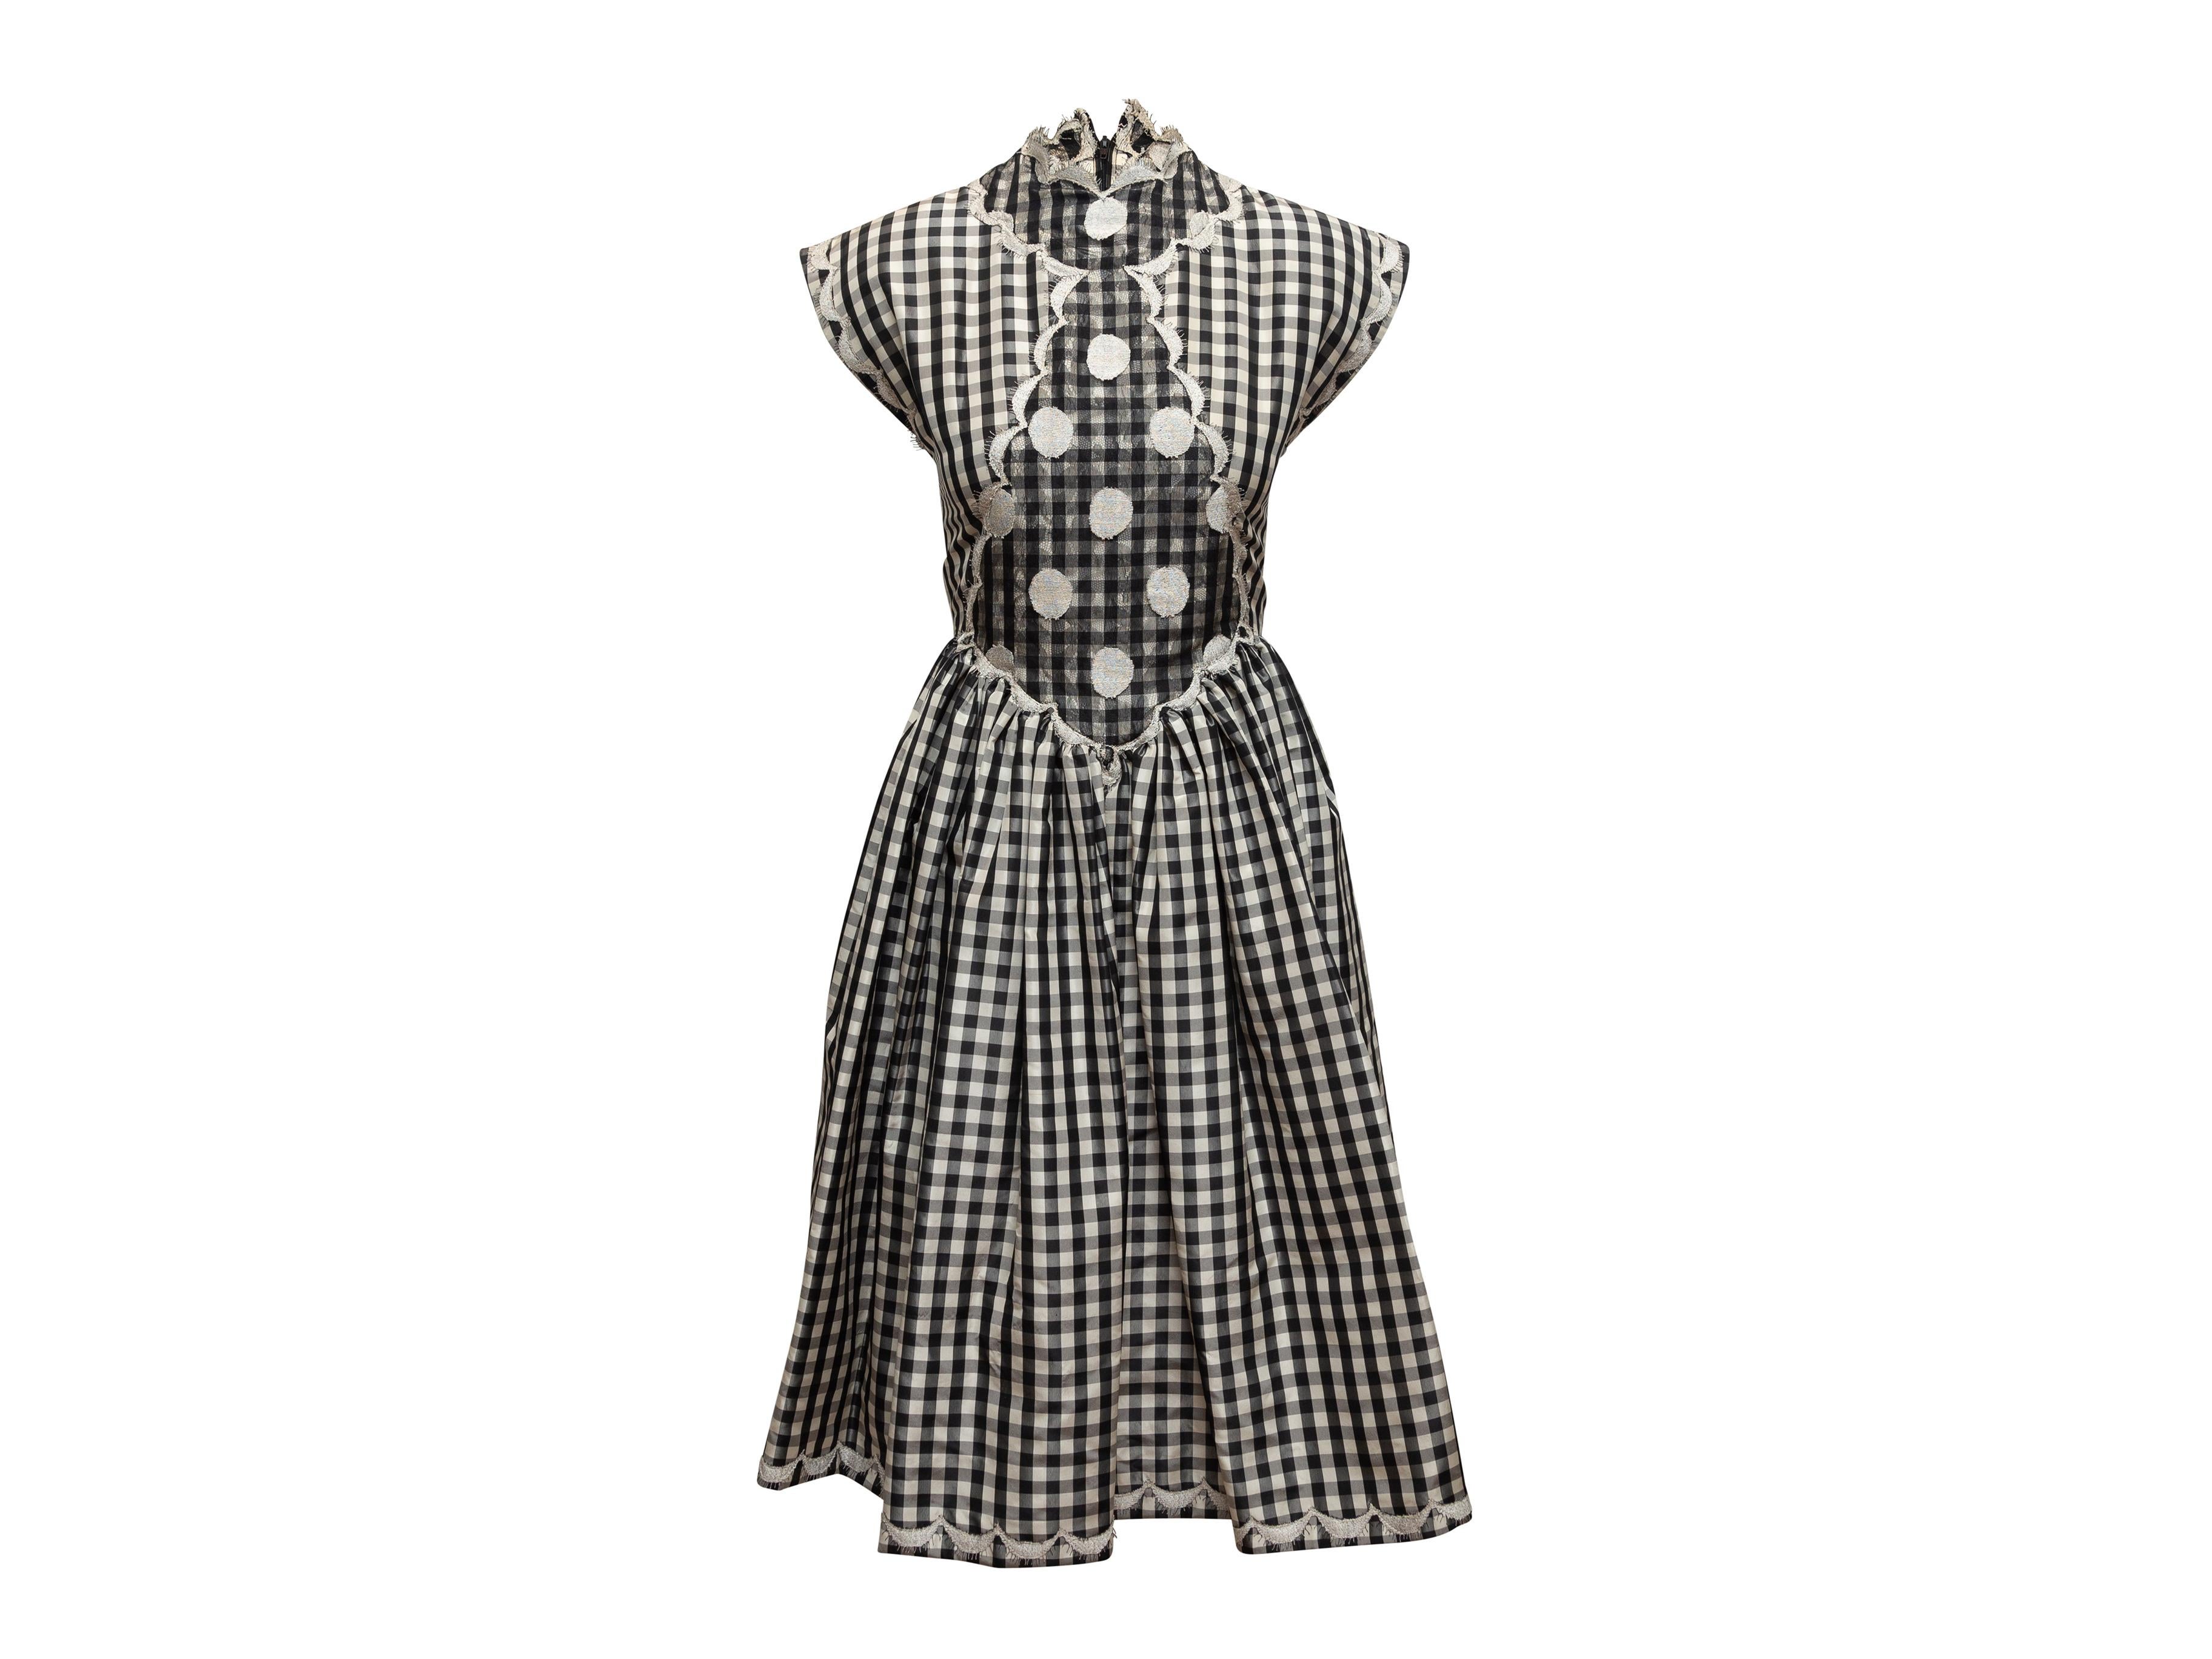 Product details: Vintage black and white gingham cap sleeve dress by Geoffrey Beene. Crew neck. Polka dot lace panel detailing at front bodice. Gathering at waist. Zip closure at back. 34